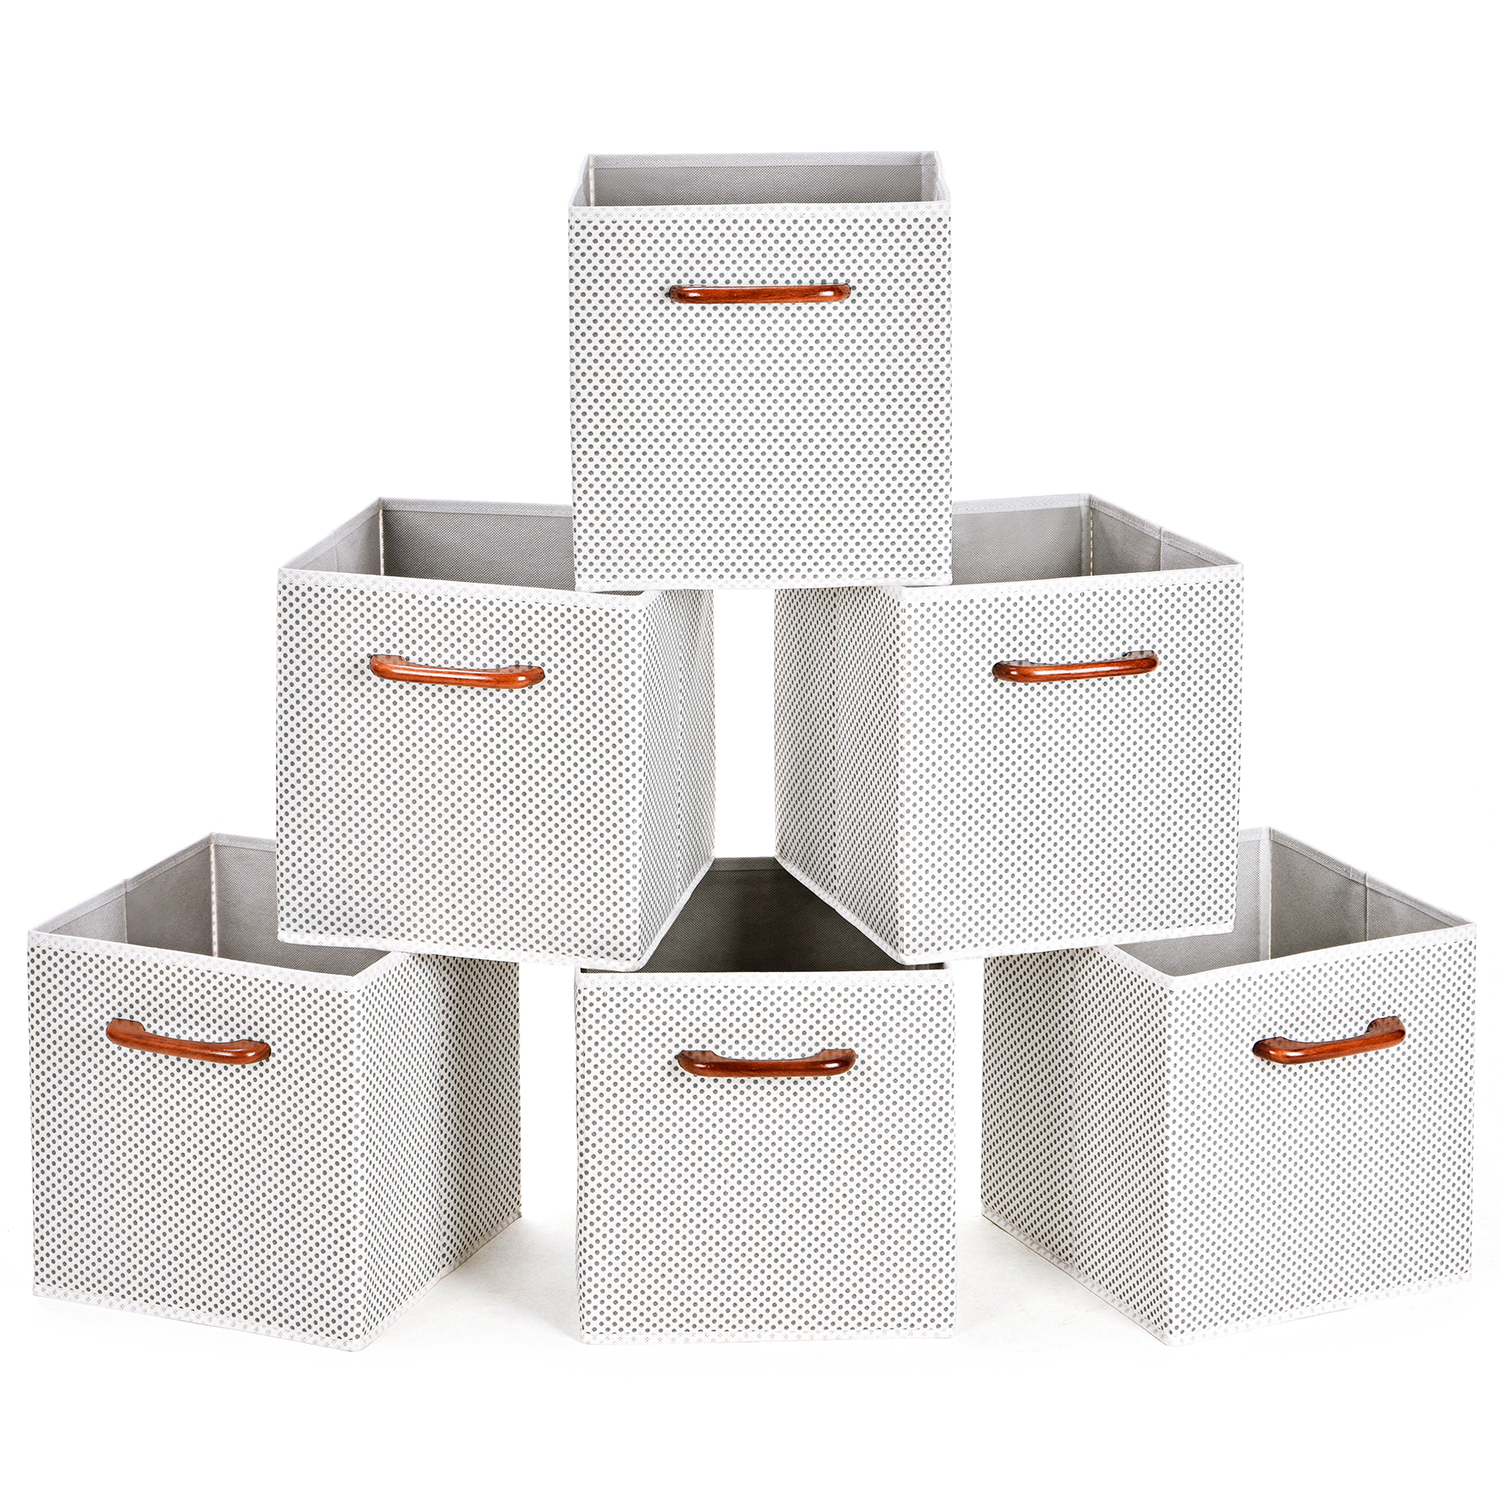 Collapsible Storage Cubes Maidmax Set Of 6 Foldable Fabric Storage within sizing 1500 X 1500